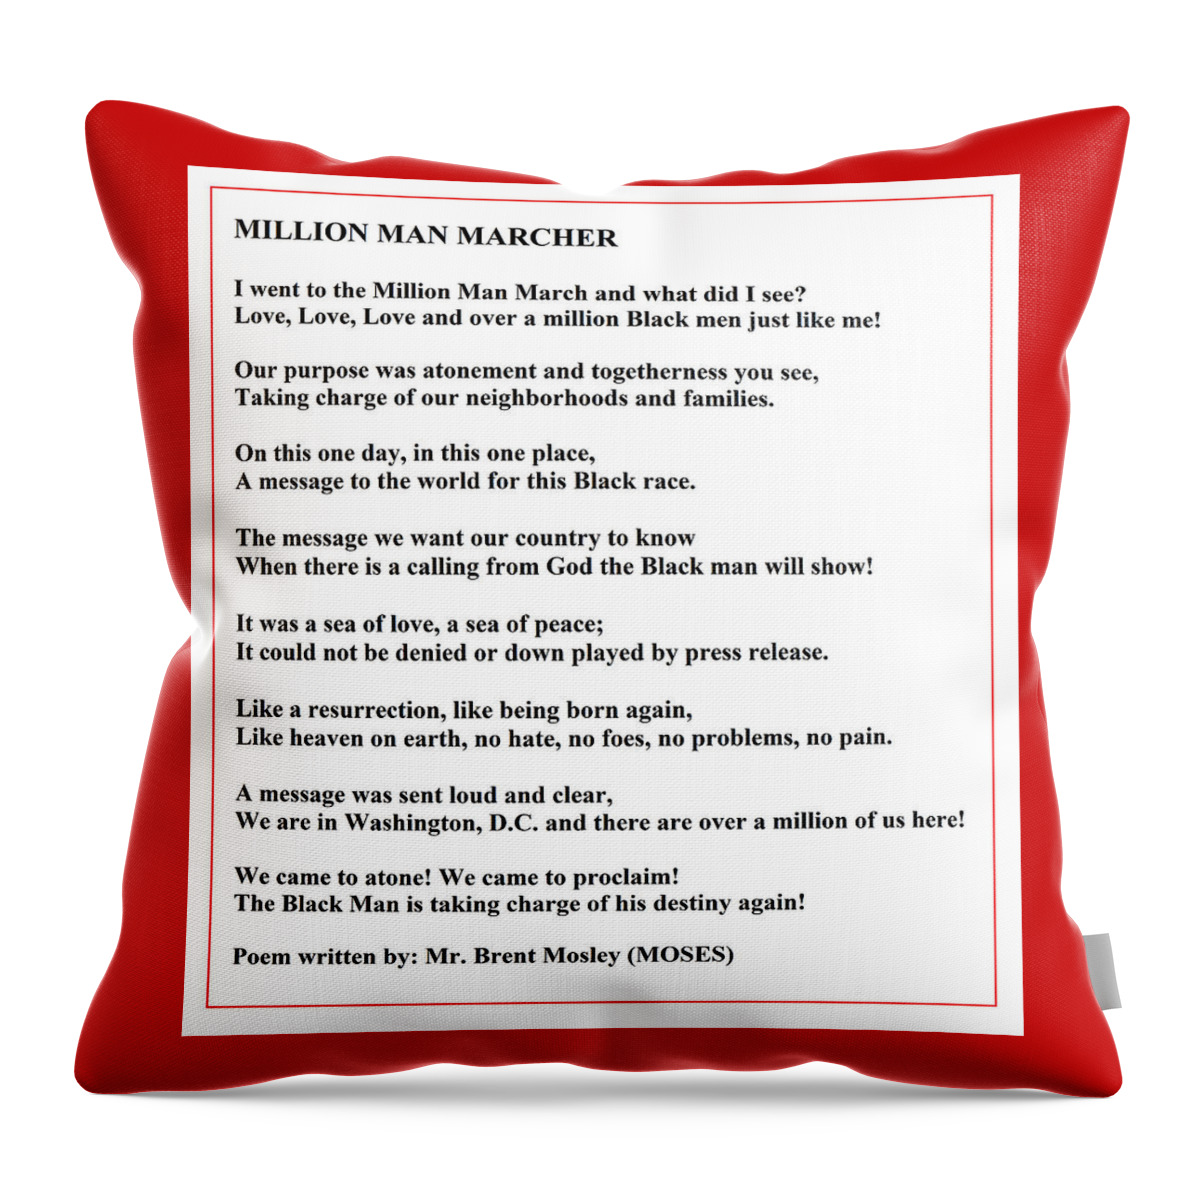 Milllion Man March Throw Pillow featuring the digital art Million Man Marcher Poem By MOSES by Adenike AmenRa